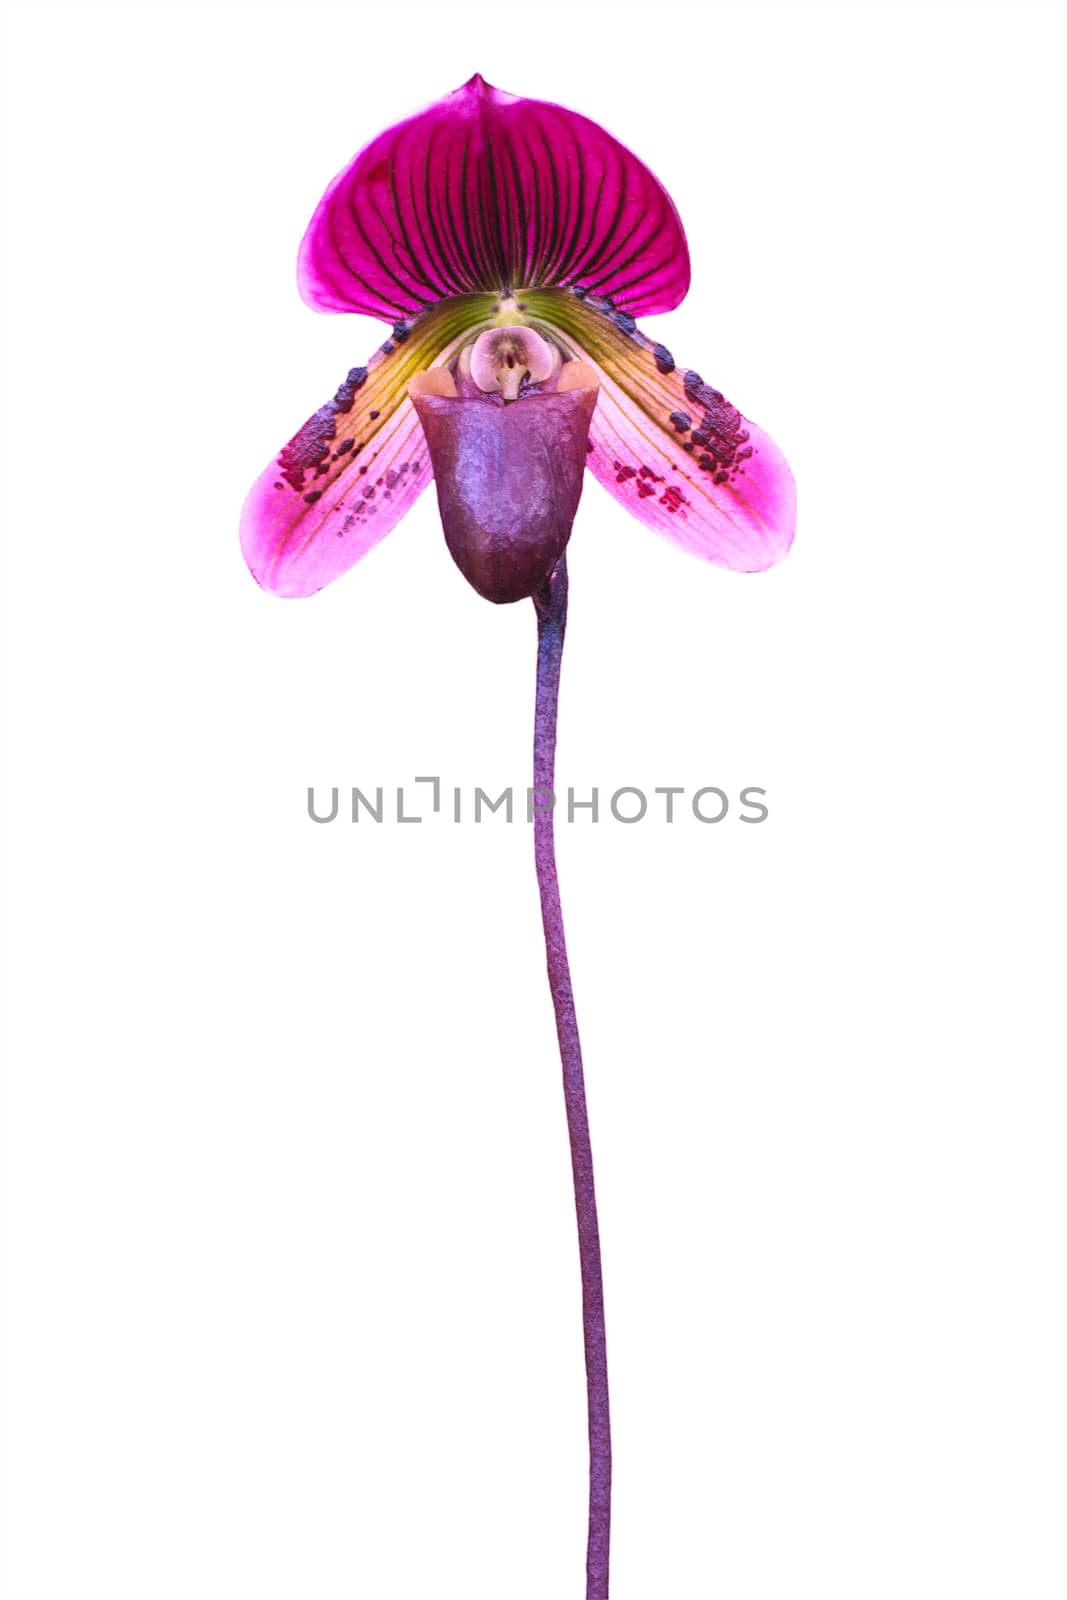 Lady's slipper orchid. Paphiopedilum Callosum isolated on white background for multipurpose